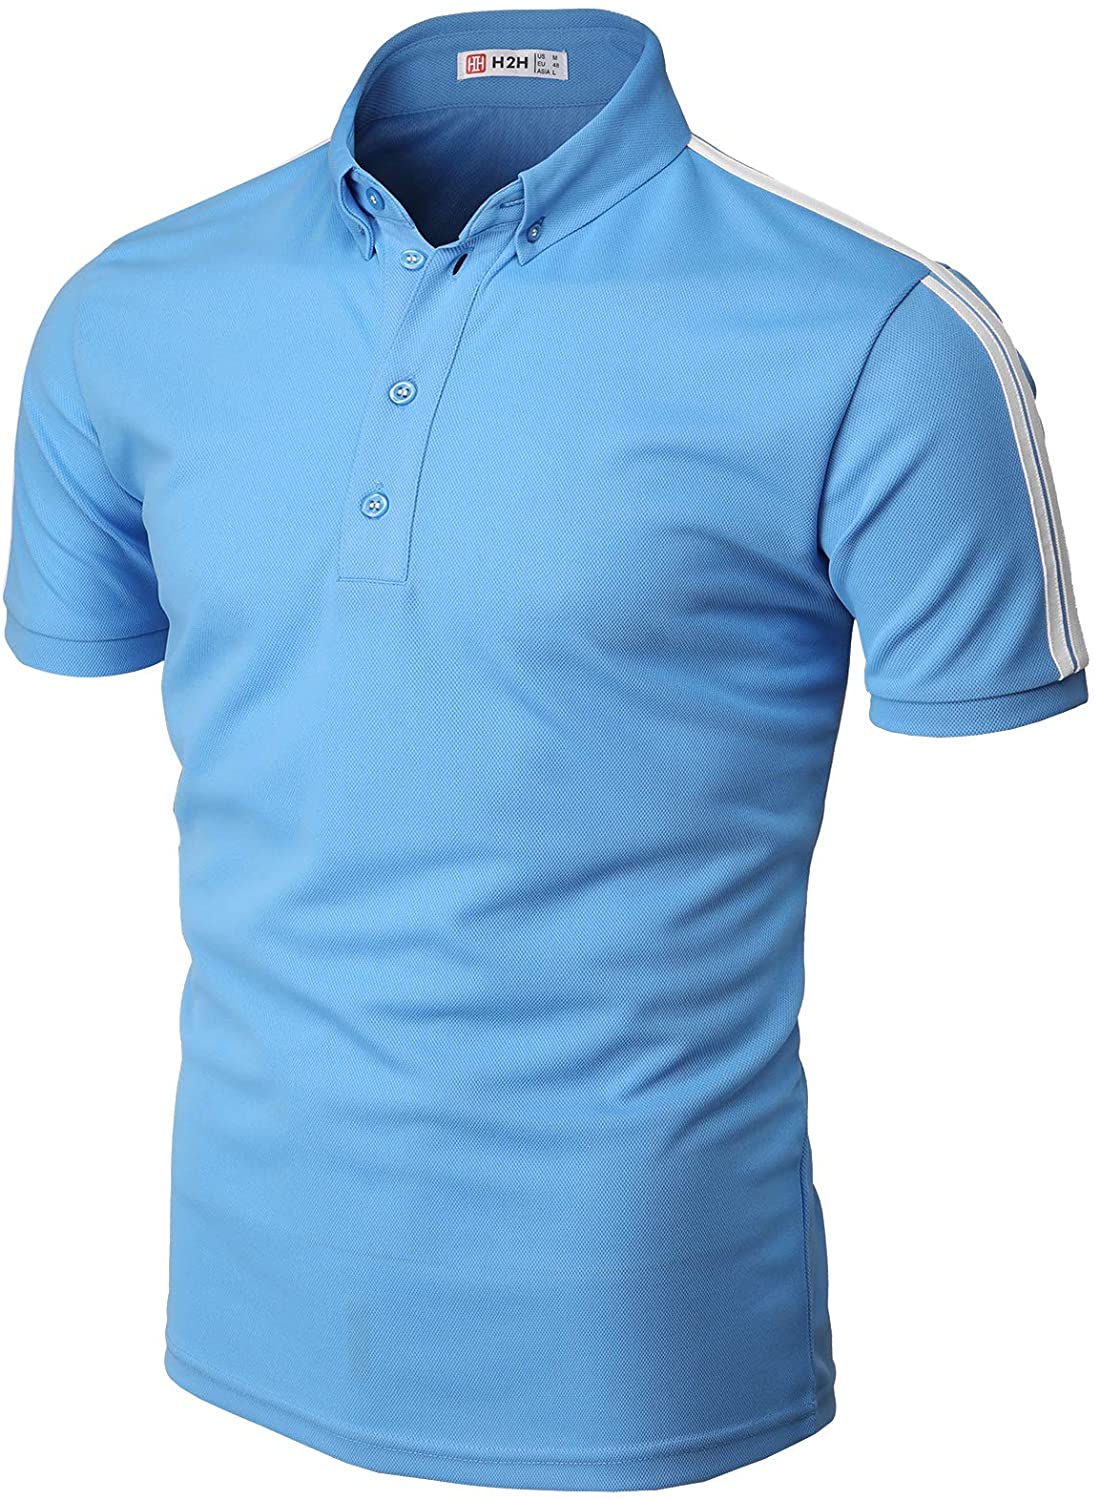 H2H Mens Casual Slim Fit Polo Shirts Short Sleeve Solid Various Styles